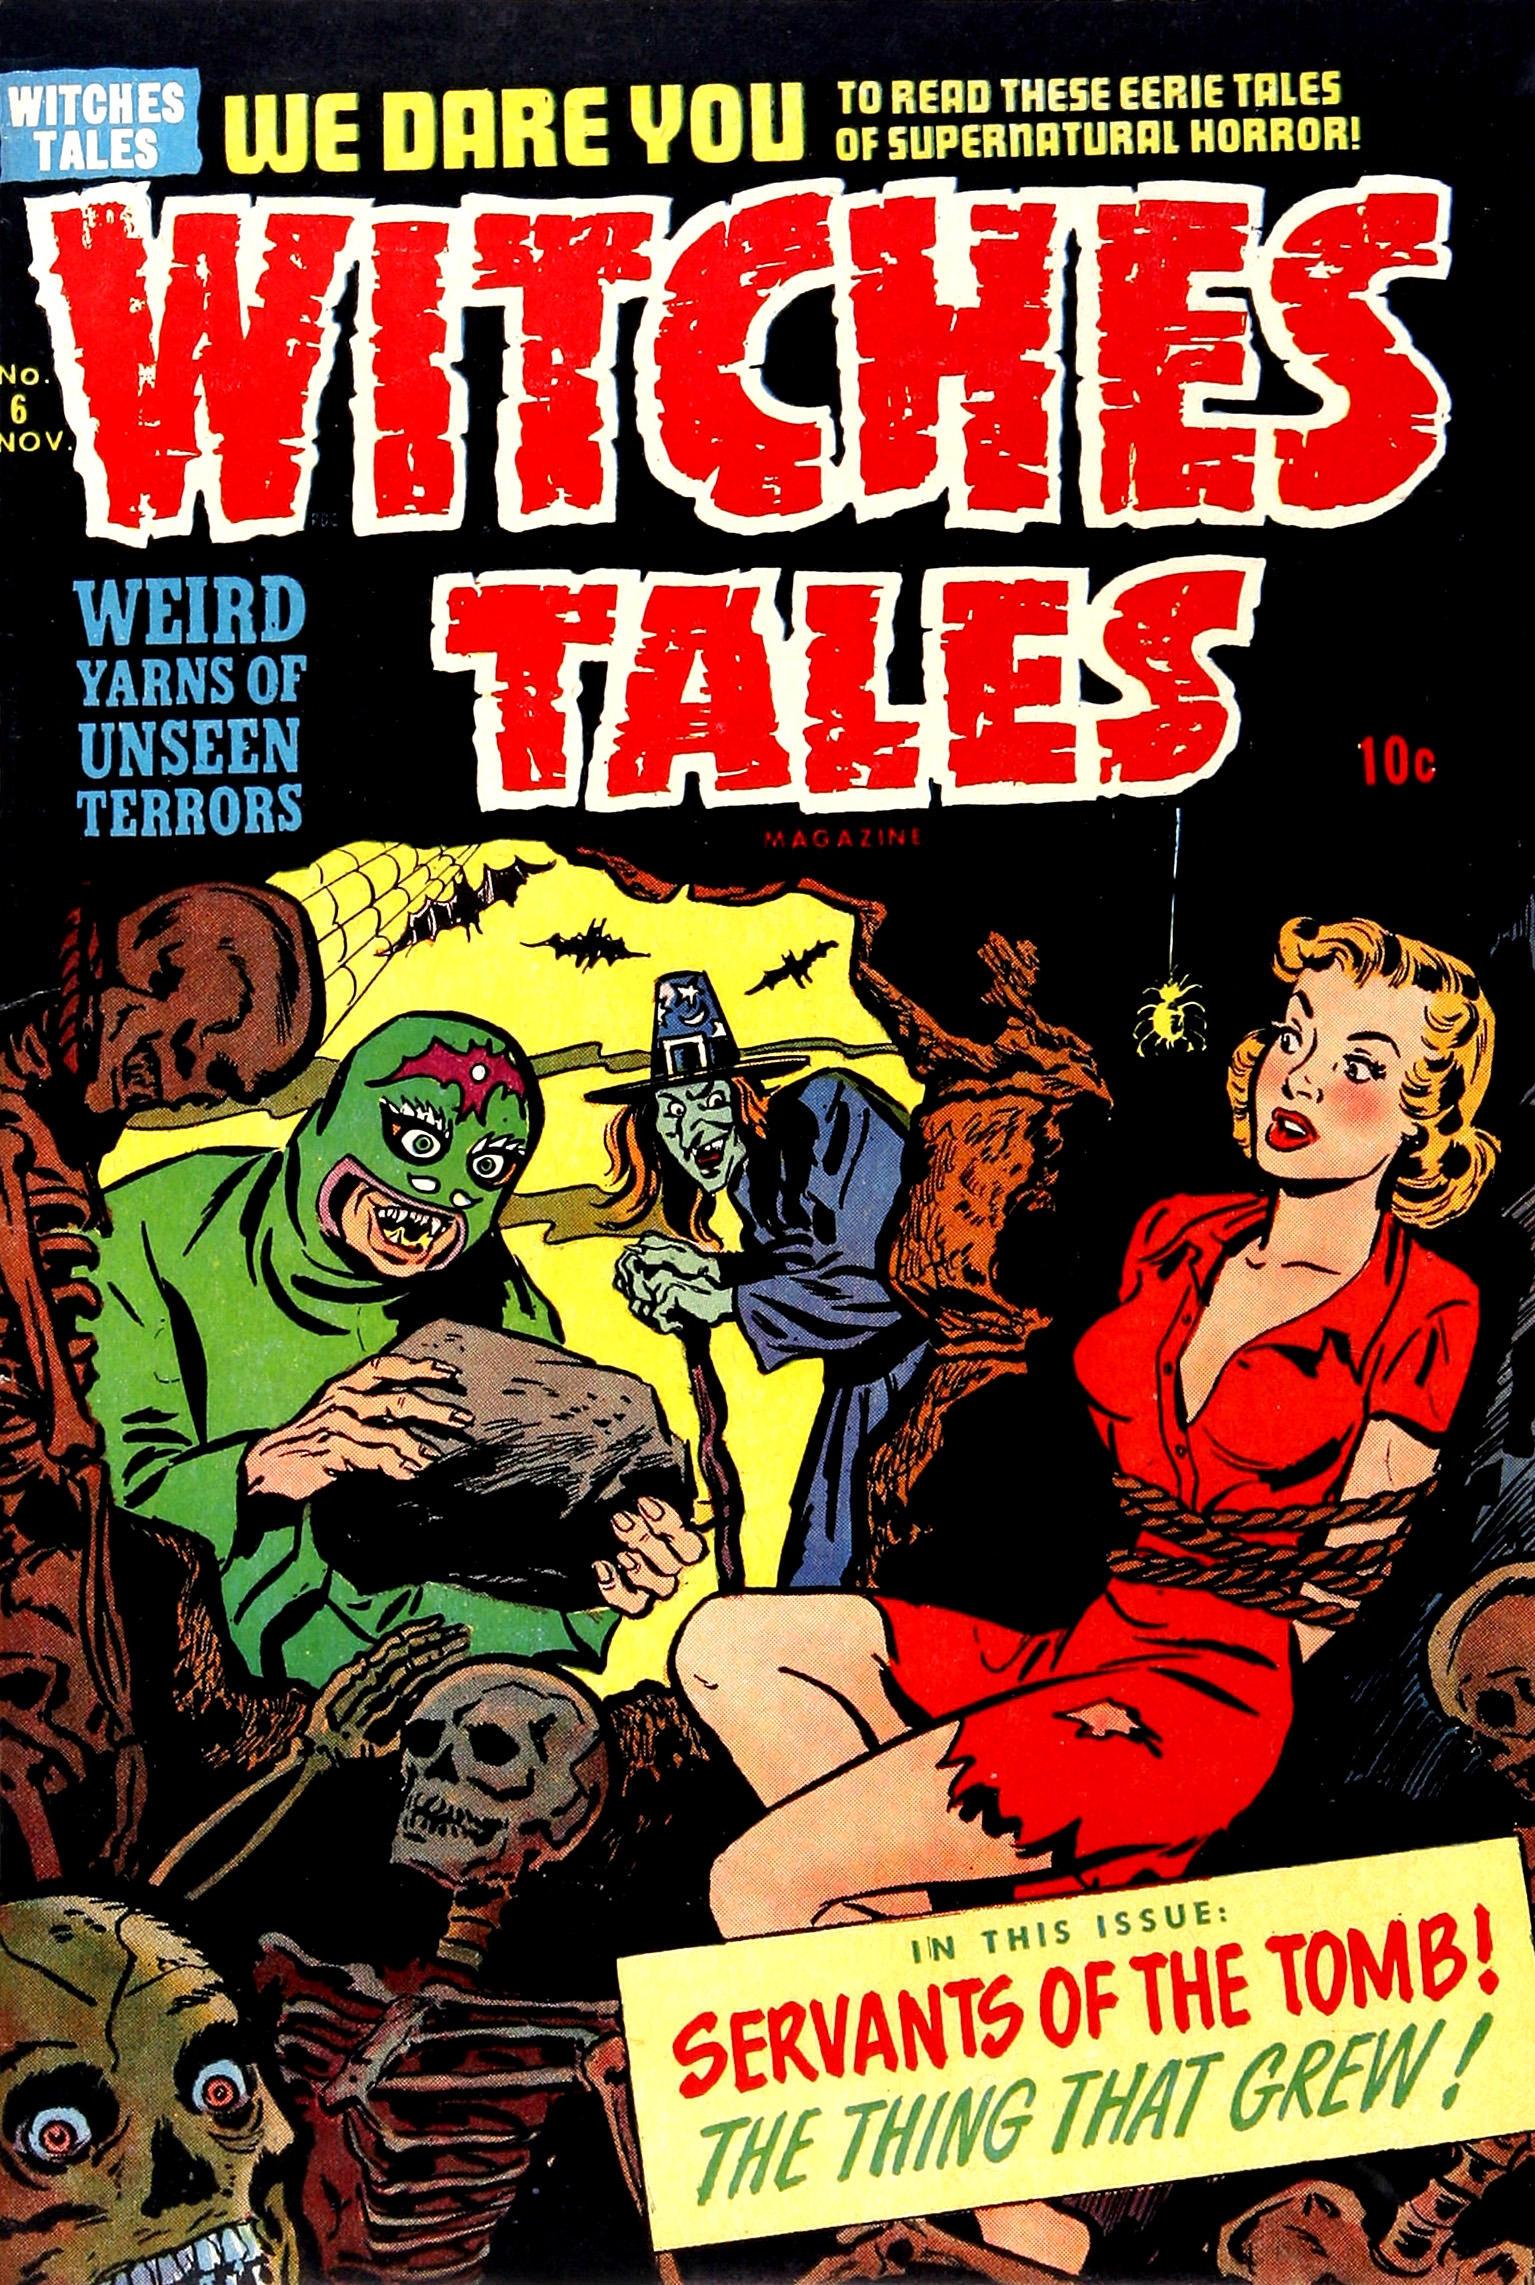 Witches Tales #6, Al Avison Cover (Harvey, 1951